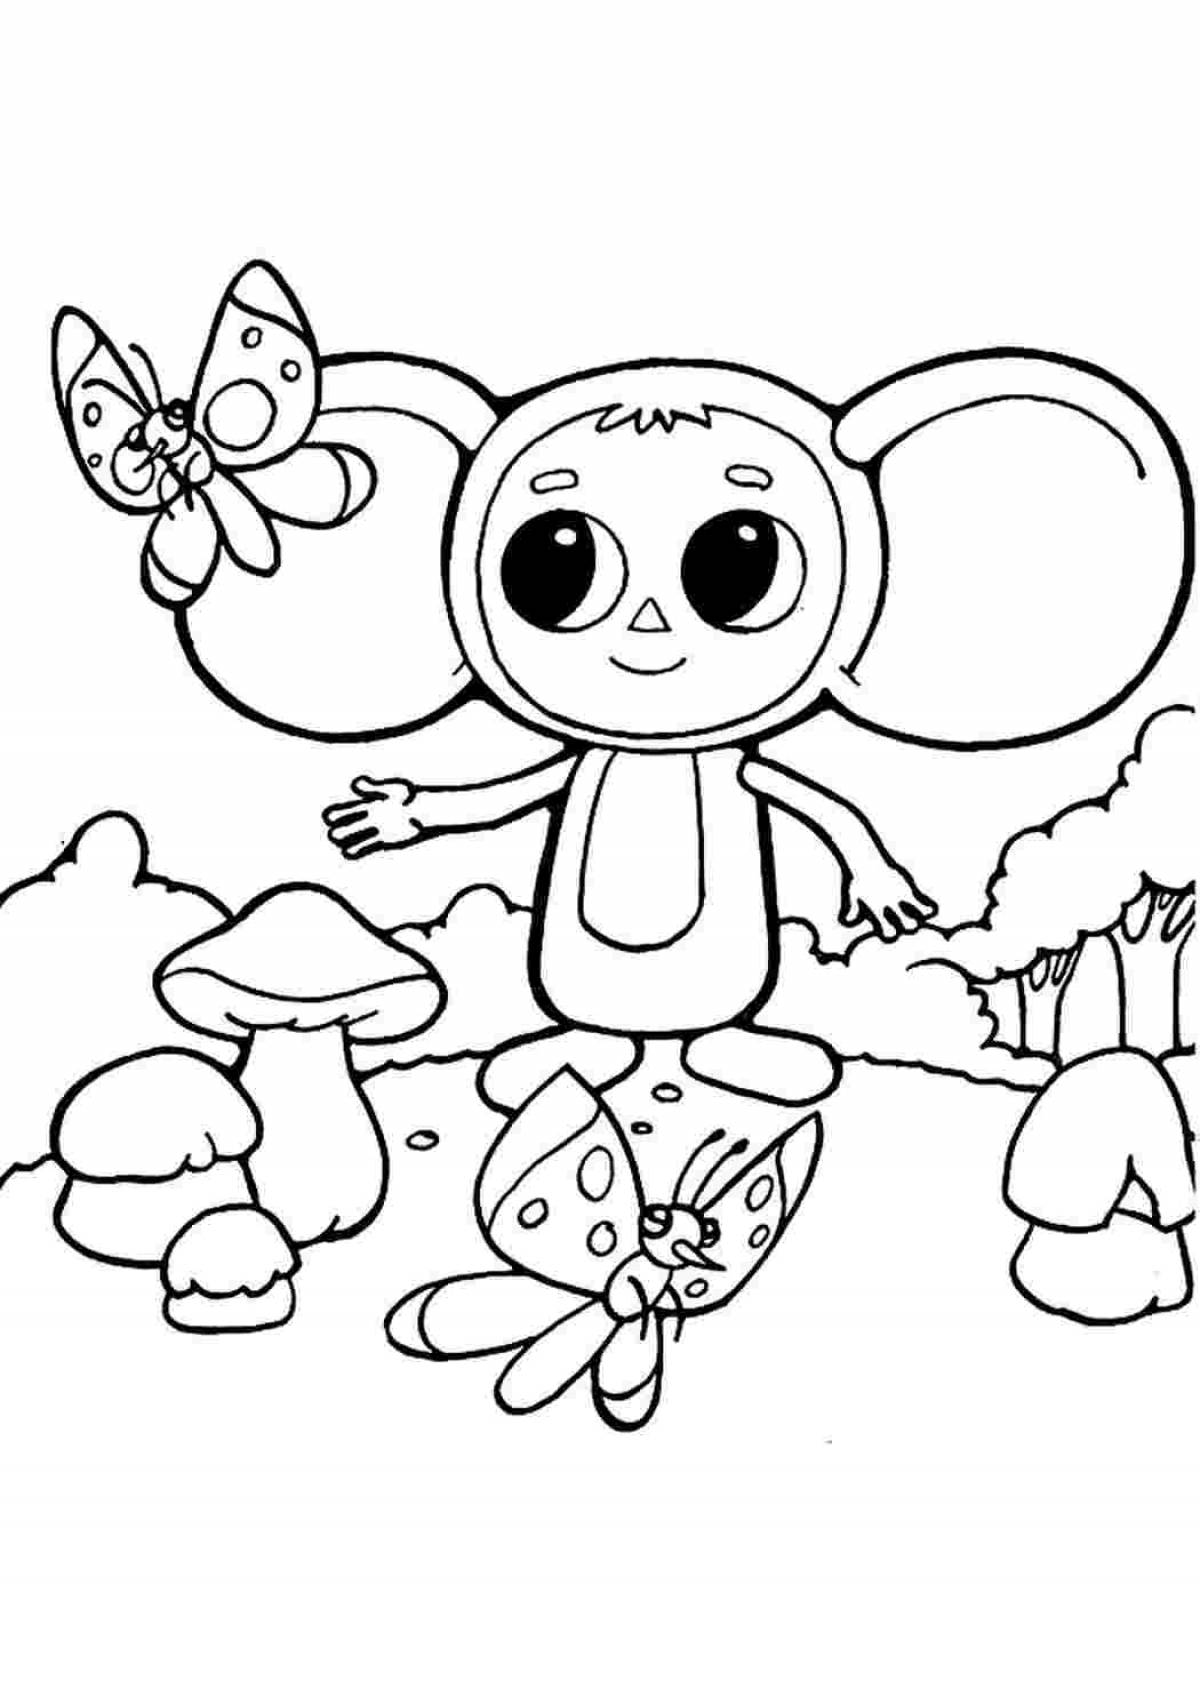 Picturesque cheburashka with flowers